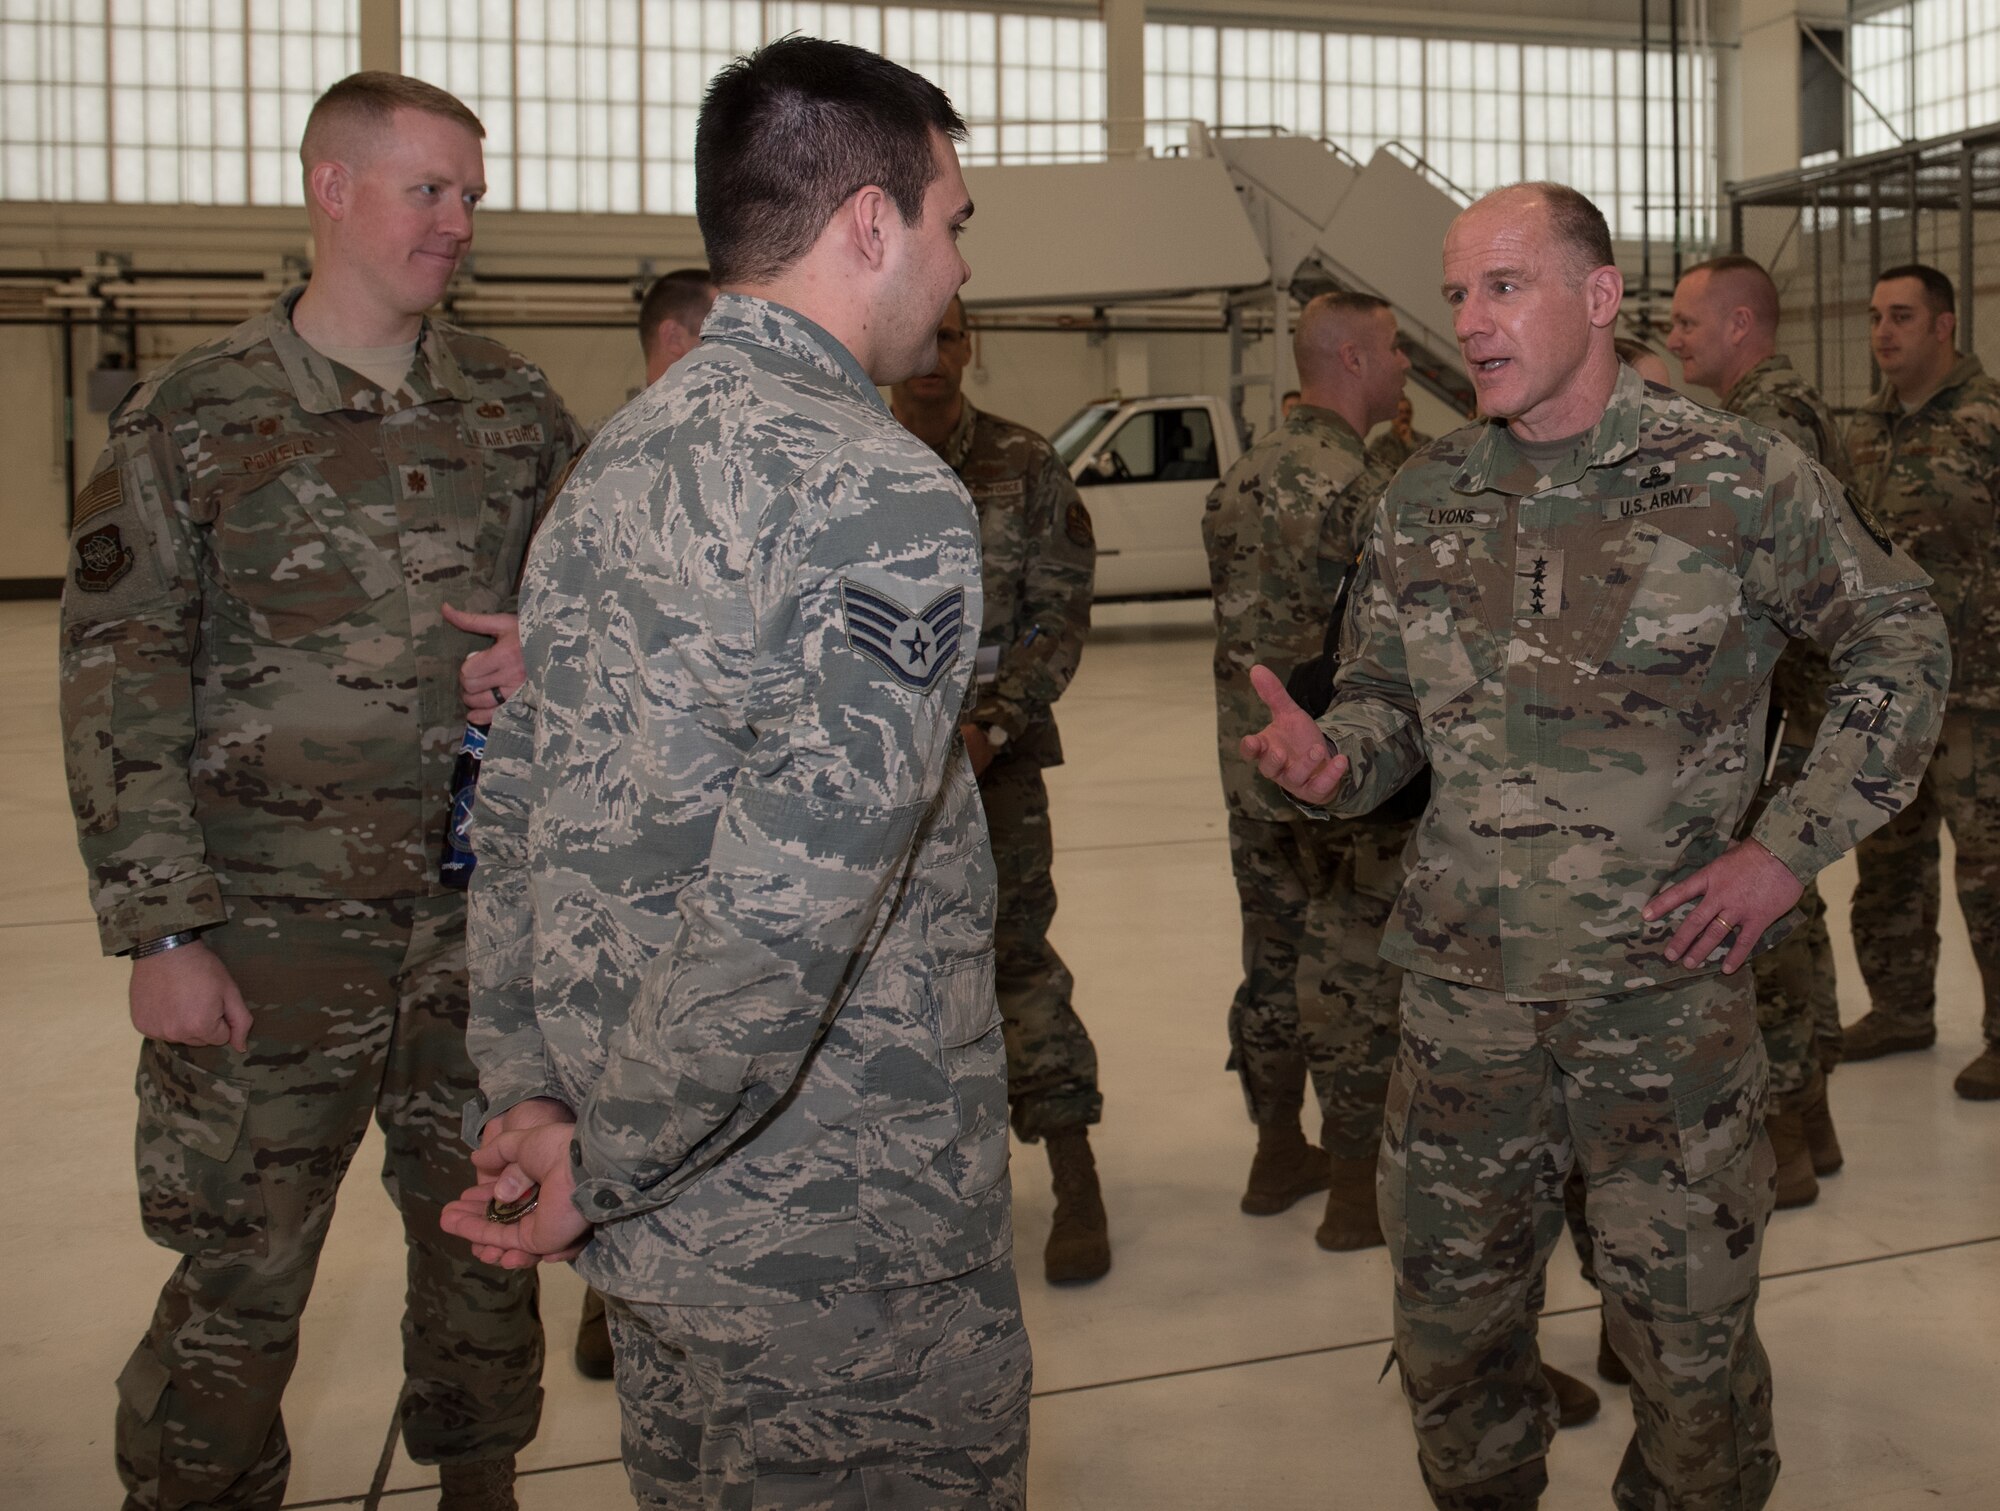 U.S. Army Gen. Stephen R. Lyons, U.S. Transportation Command commander, speaks to Staff Sgt. Austin Barlow, 22nd Maintenance Squadron inspection section journeyman, Feb. 21, 2019, at McConnell Air Force Base, Kan. Lyons coined Airmen assigned to the 22nd Air Refueling Wing and the 931st ARW during his visit. (U.S. Air Force photo by Staff Sgt. David Bernal Del Agua)